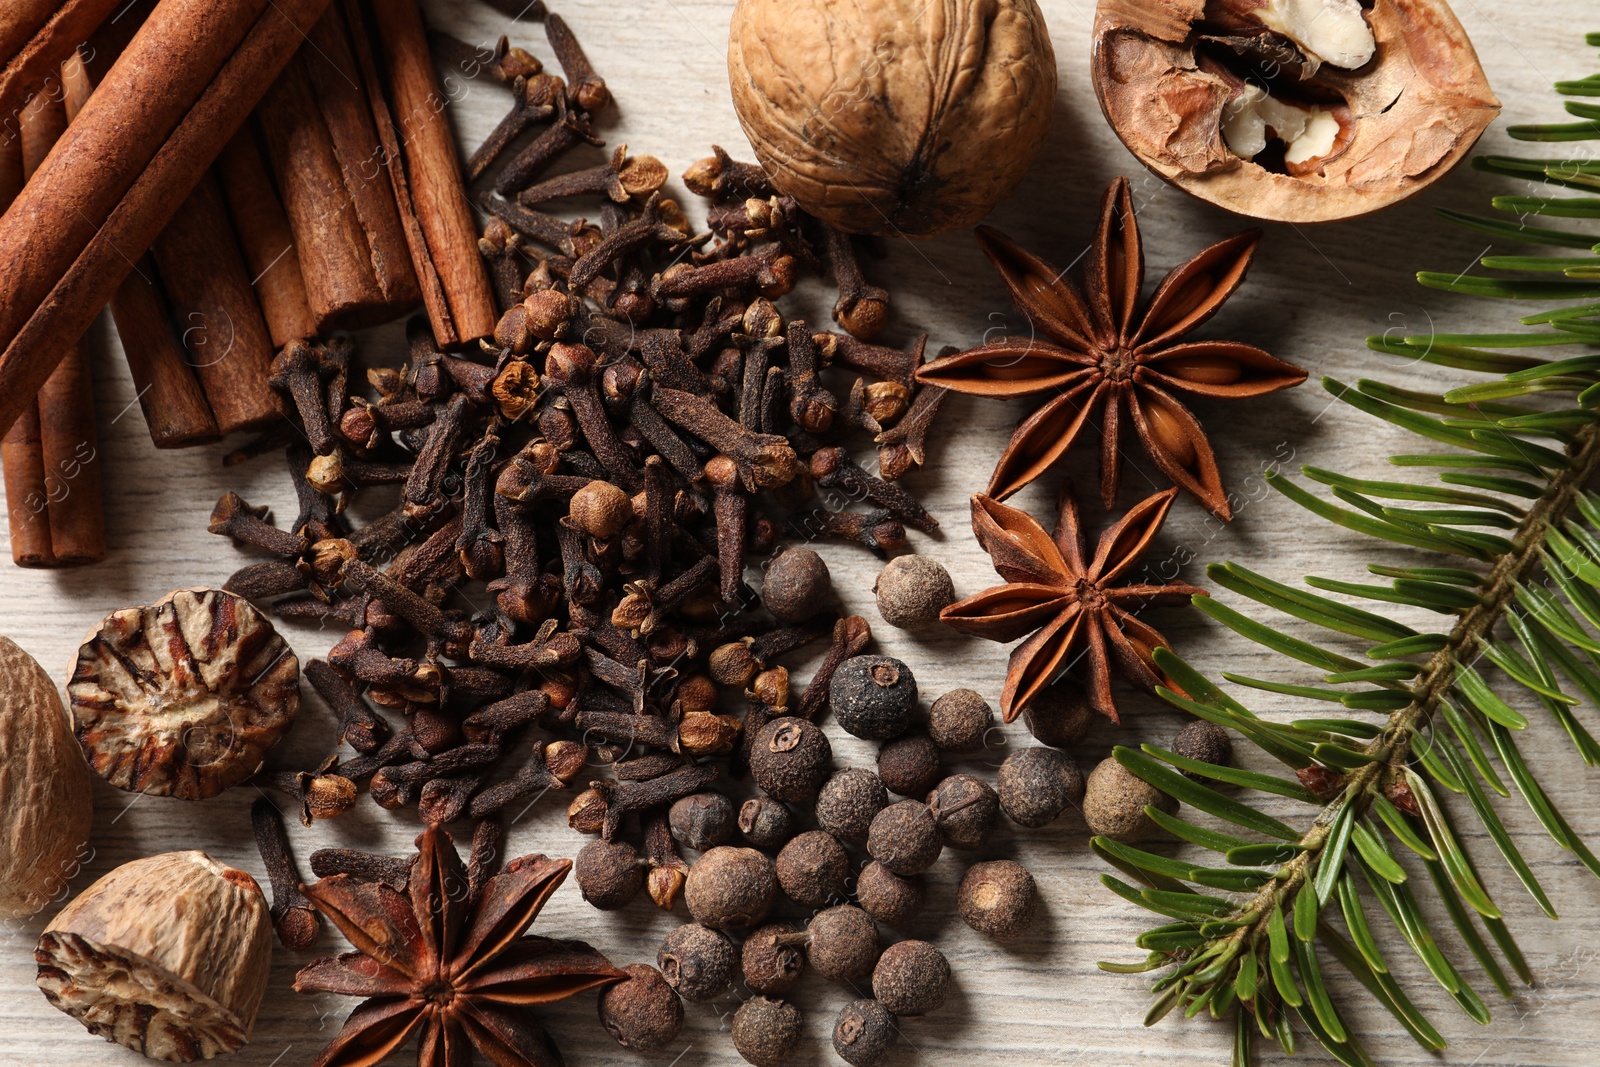 Photo of Different spices, nuts and fir branch on wooden table, flat lay